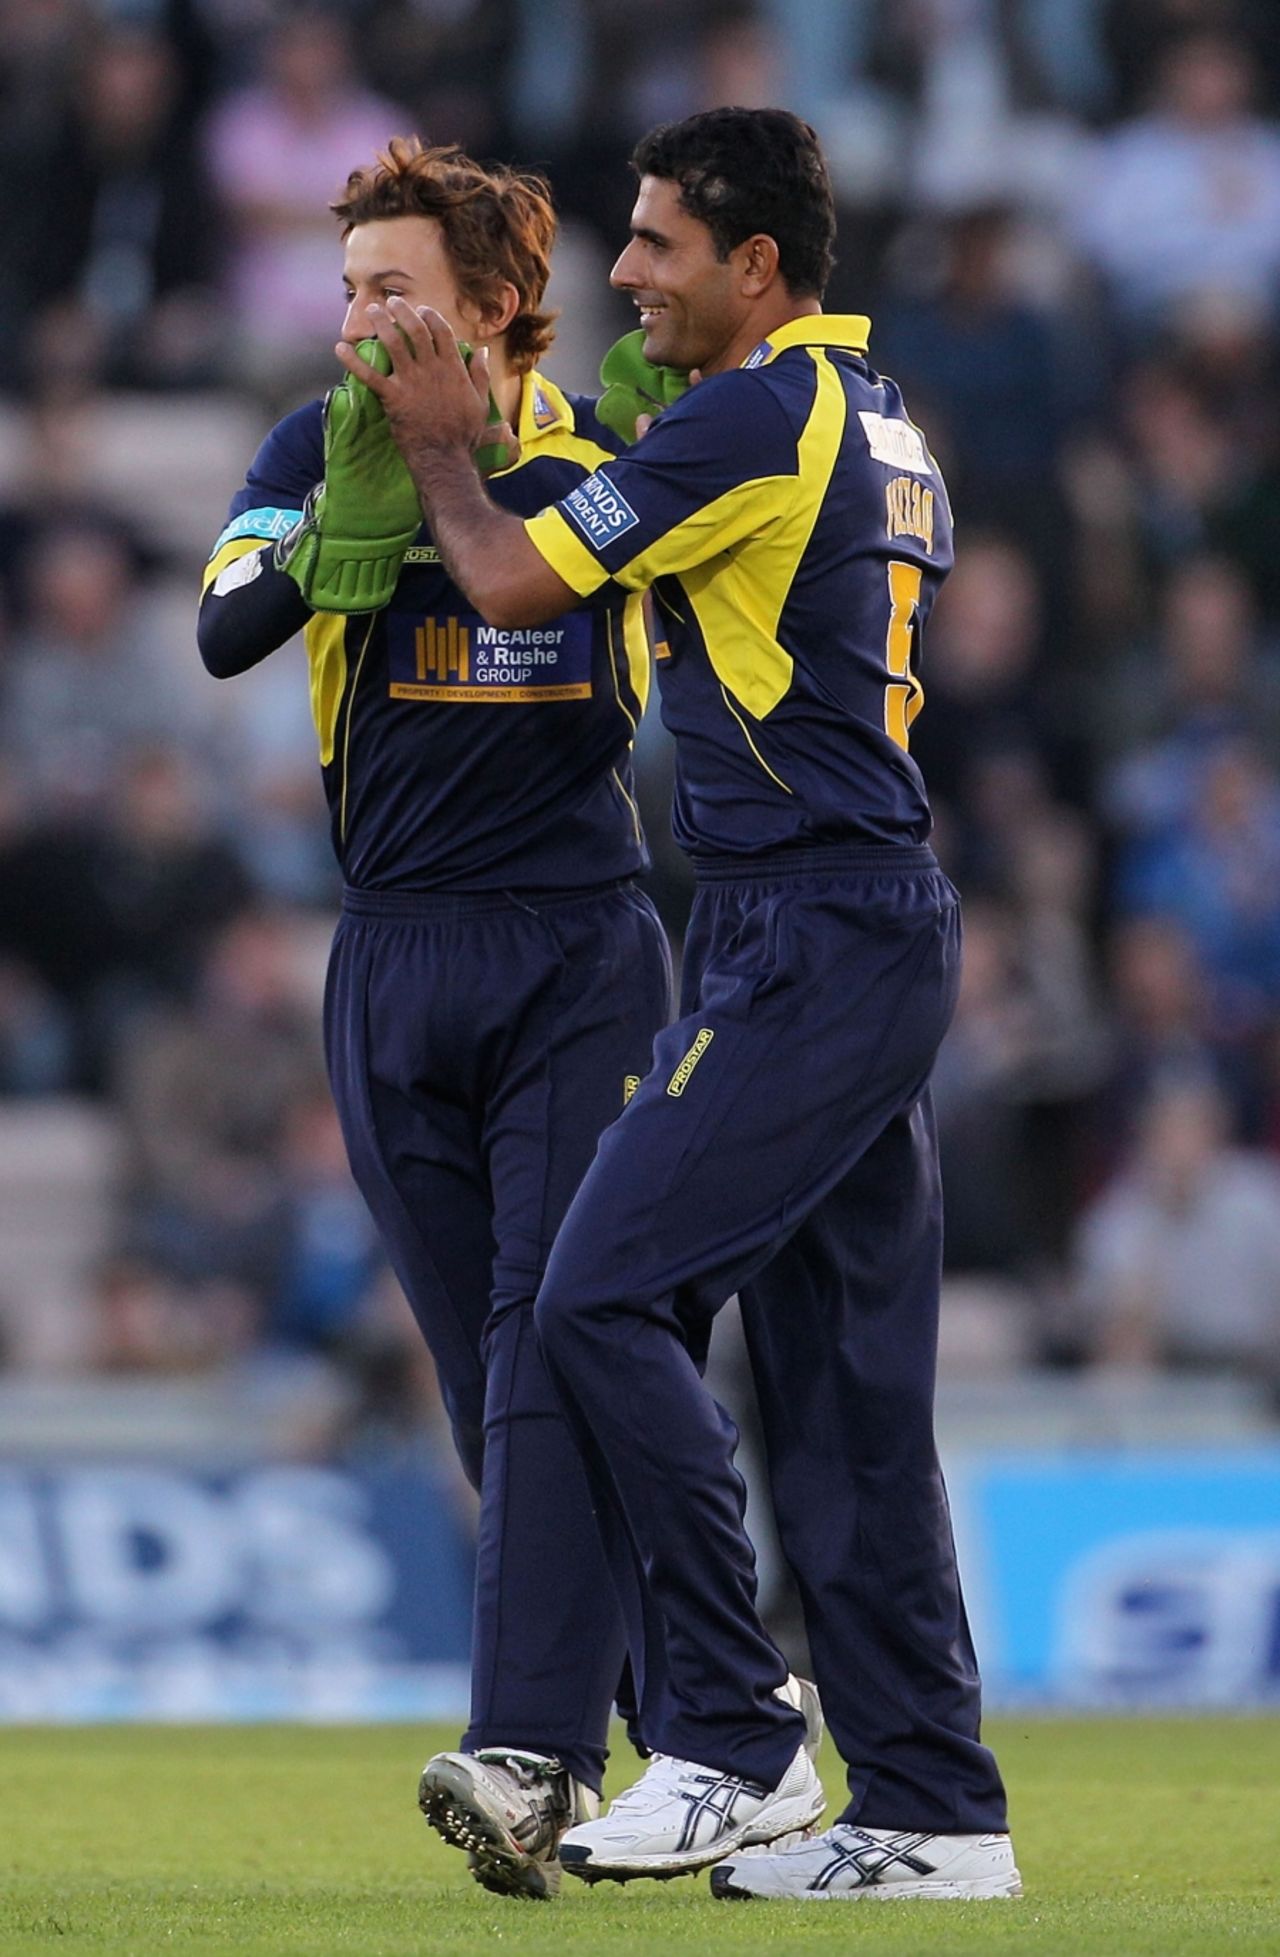 Abdul Razzaq struck in his first over to remove a marauding Marcus Trescothick, Hampshire v Somerset, FP t20 Final, Rose Bowl, August 14 2010